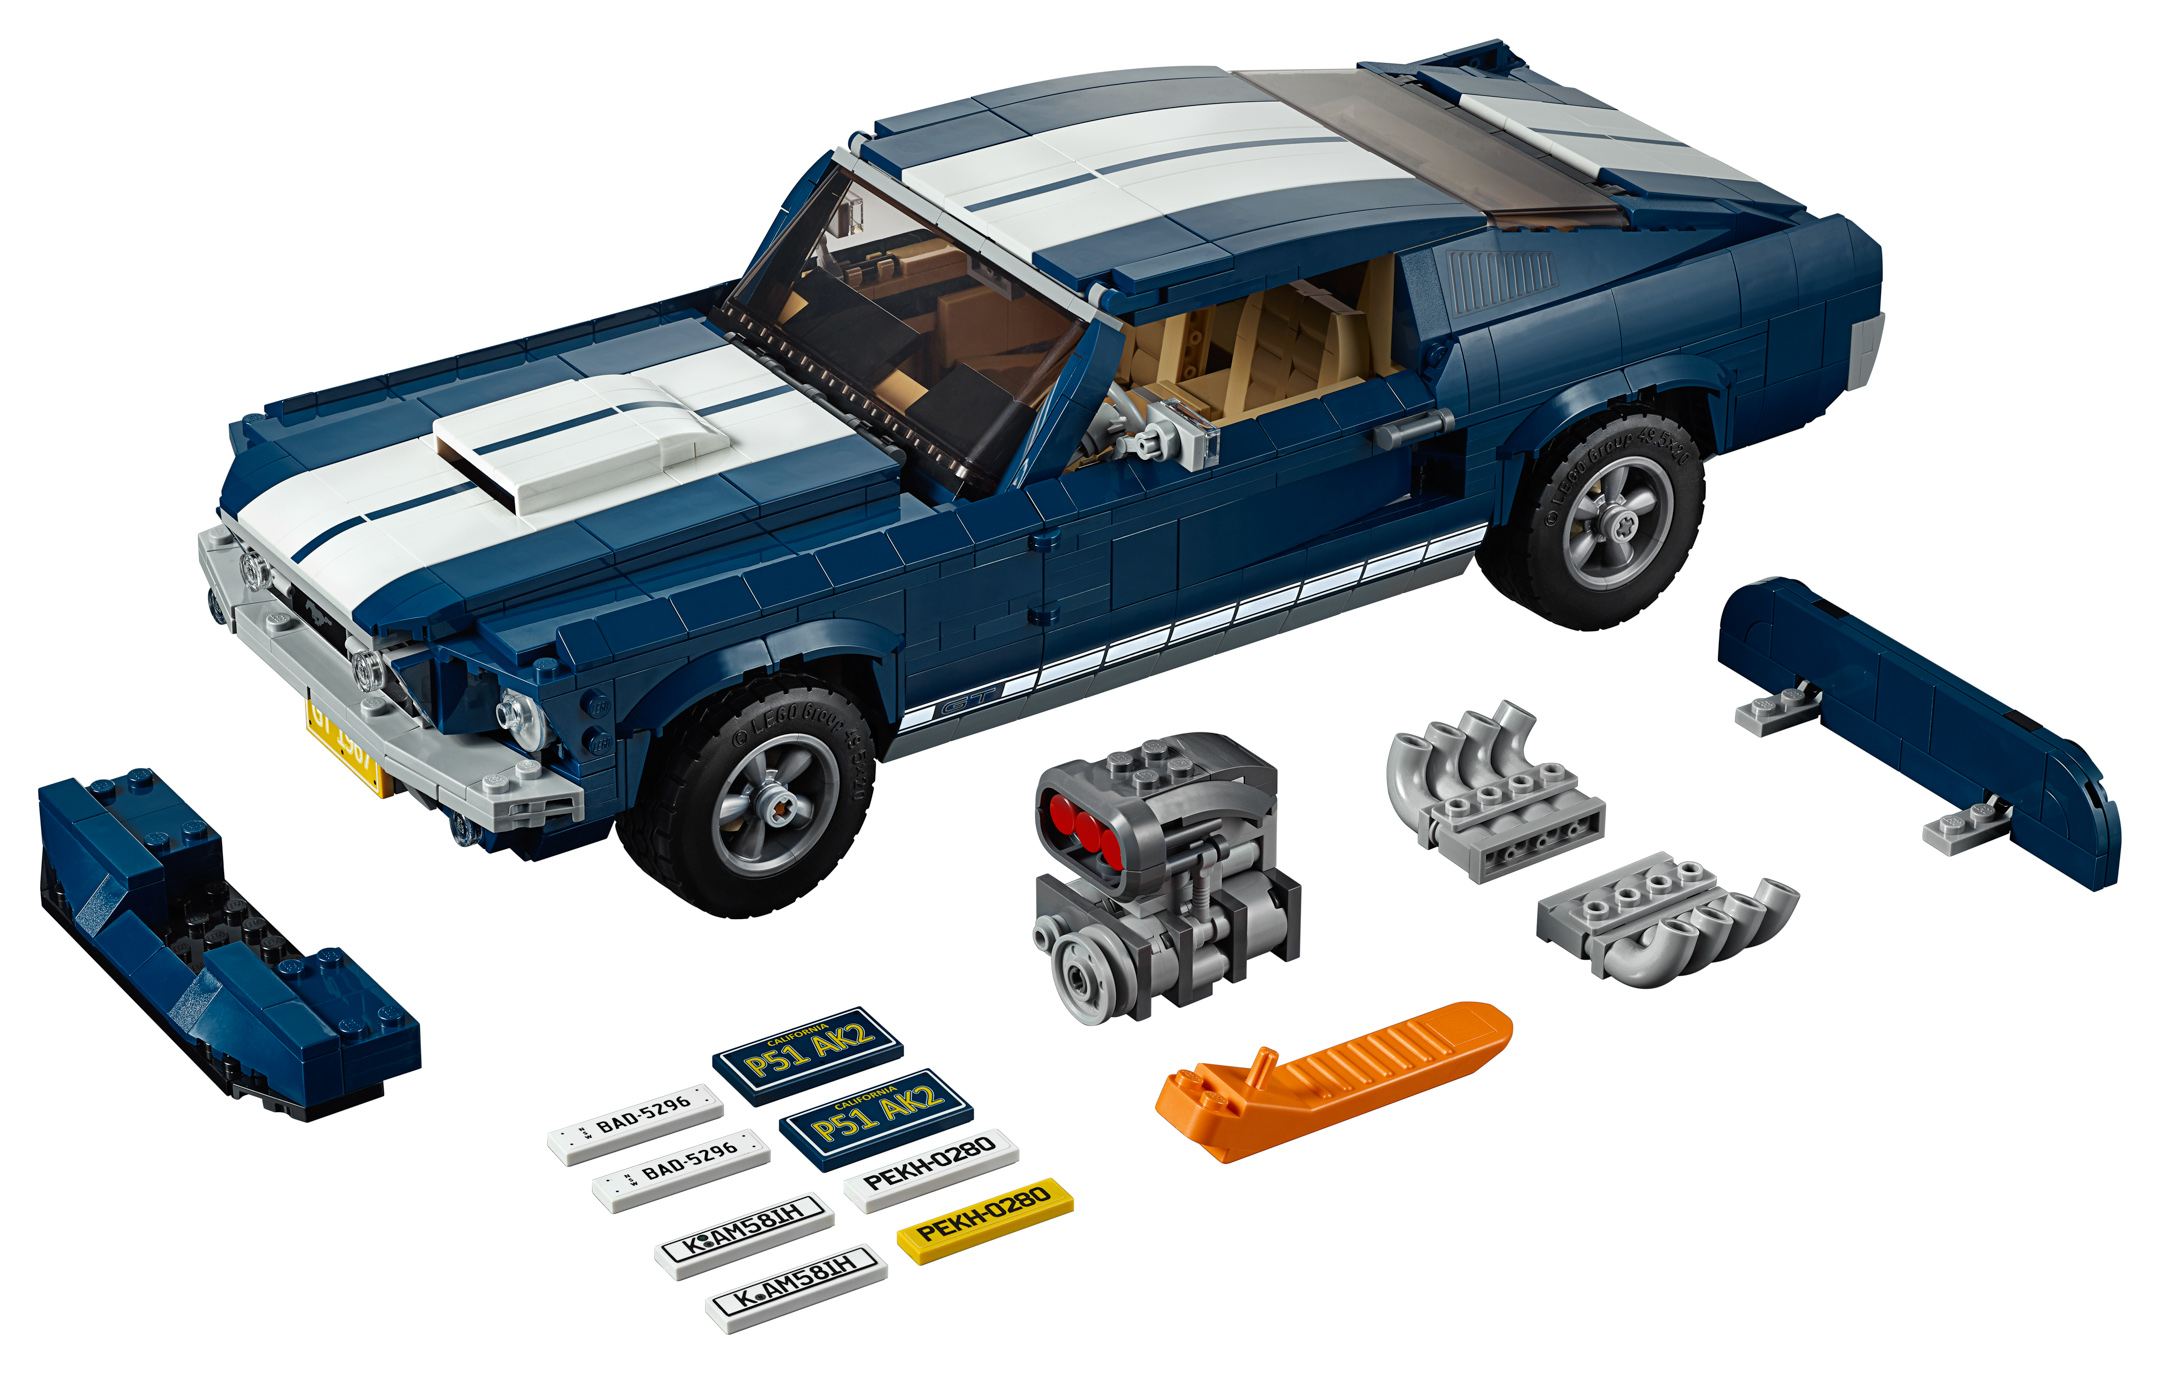 62d9c 10265 LEGO Creator Expert Ford Mustang 7